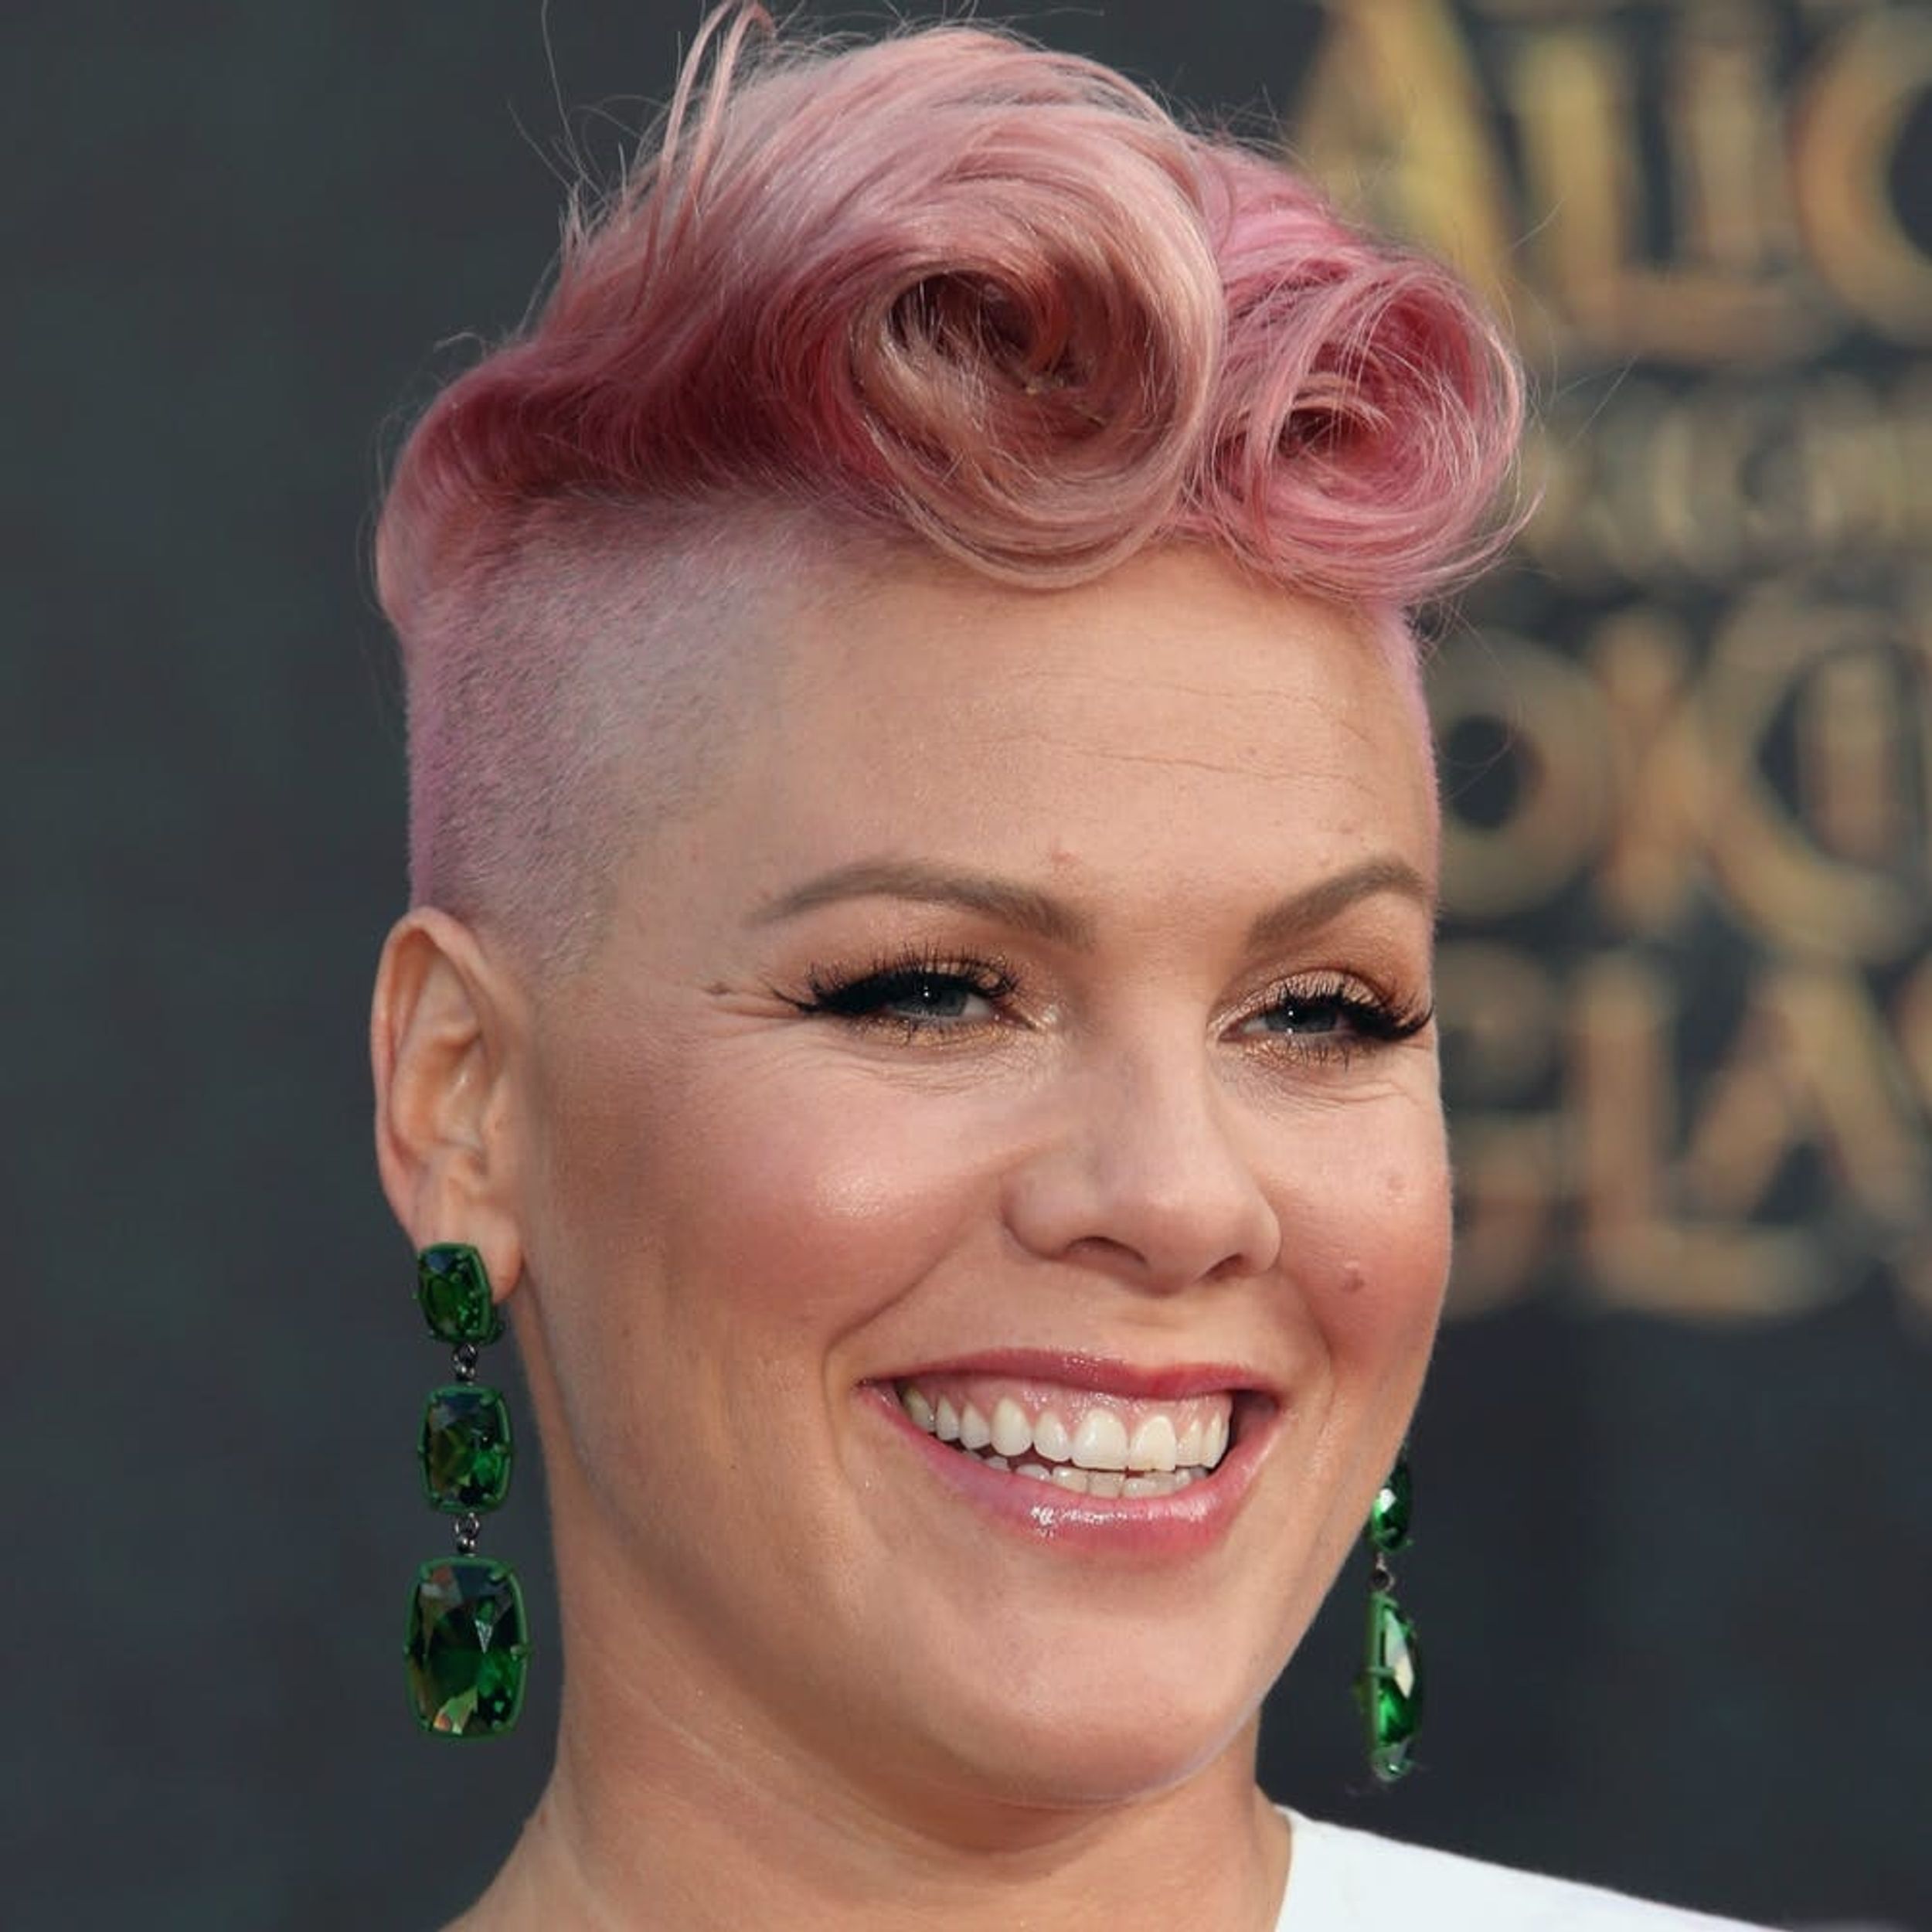 Pink Just Announced Her Pregnancy + Debuted Her Baby Bump With One “Perfect” Fall Photo